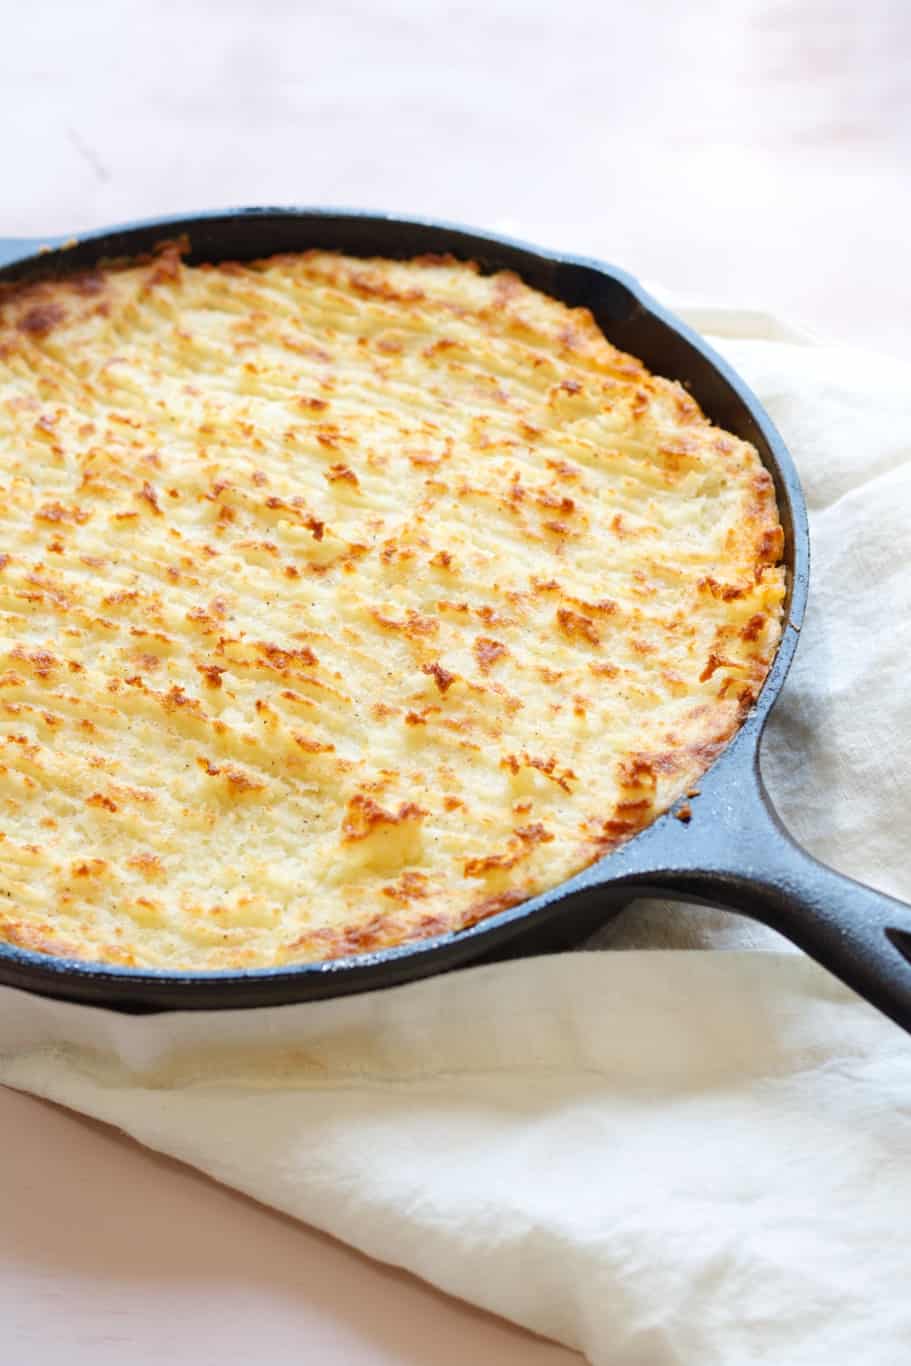 Golden and crispy shepherd's pie made with leftover lamb roast and soft and fluffy mashed potatoes